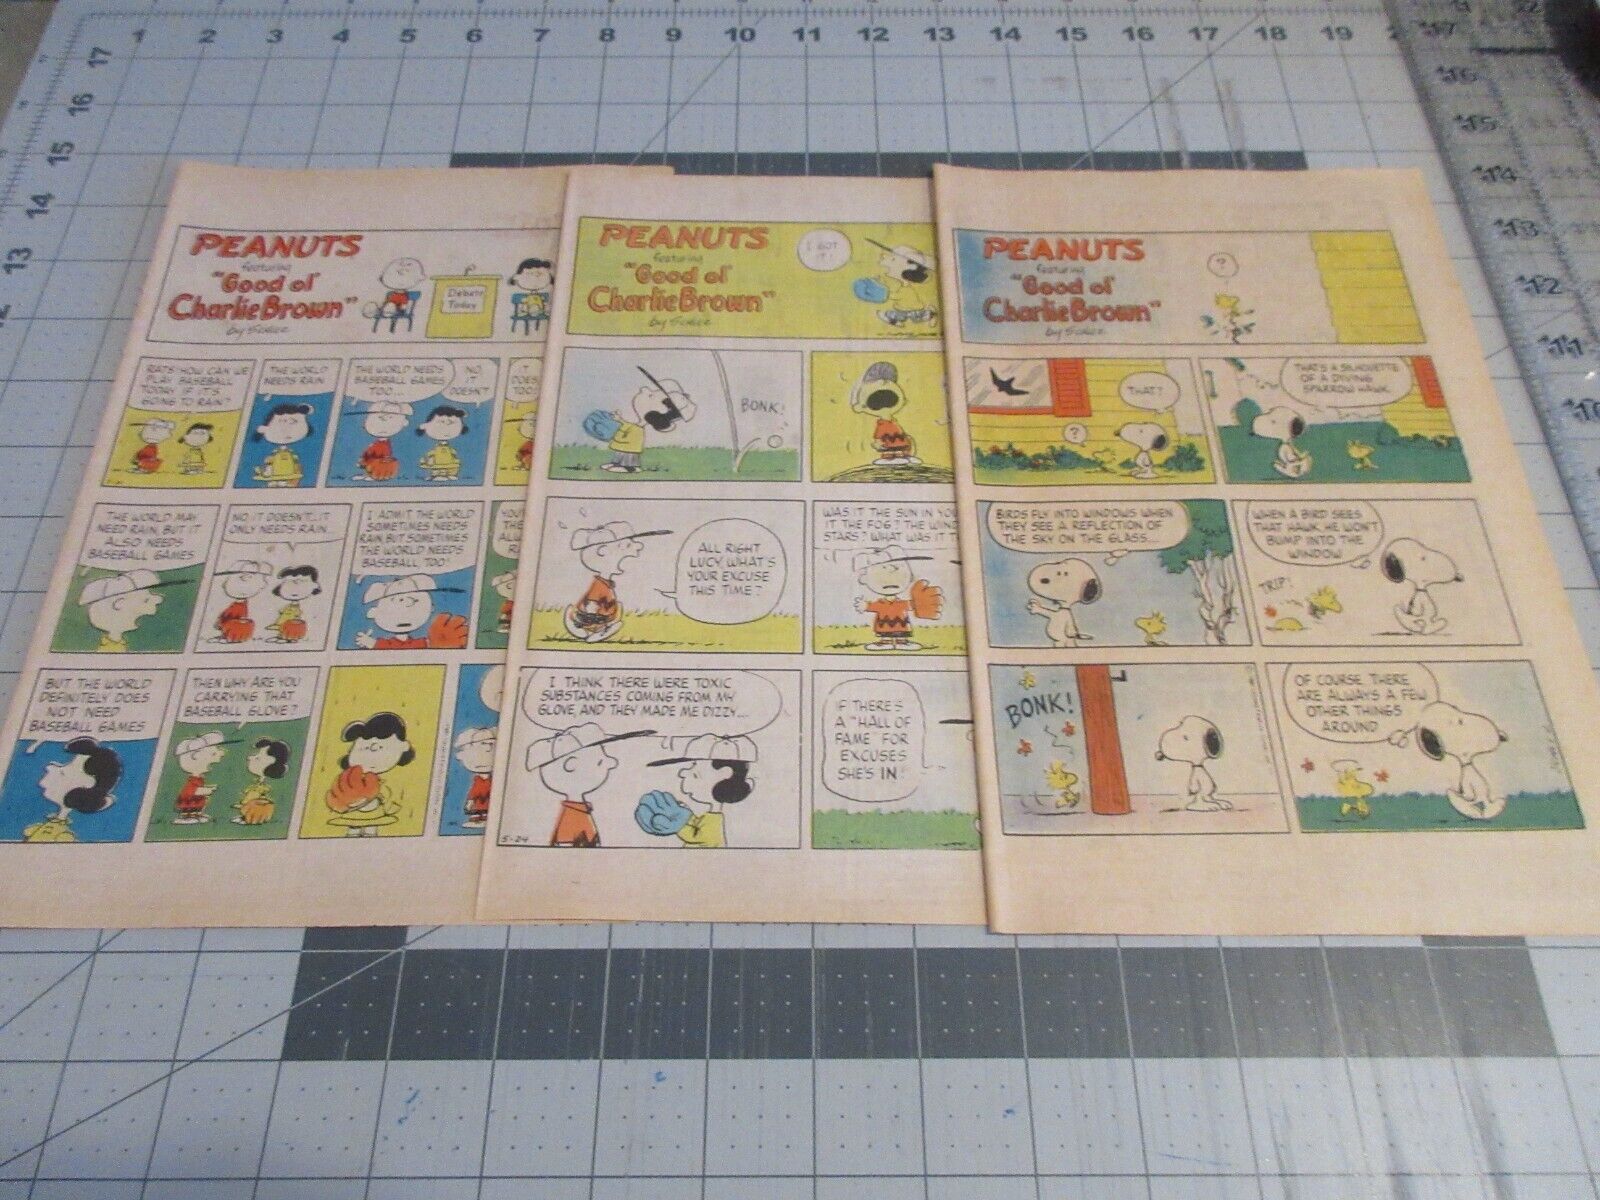 Lot of 3 Peanuts Good Ol\' Charlie Brown by Schulz Sunday comic Strips 1981